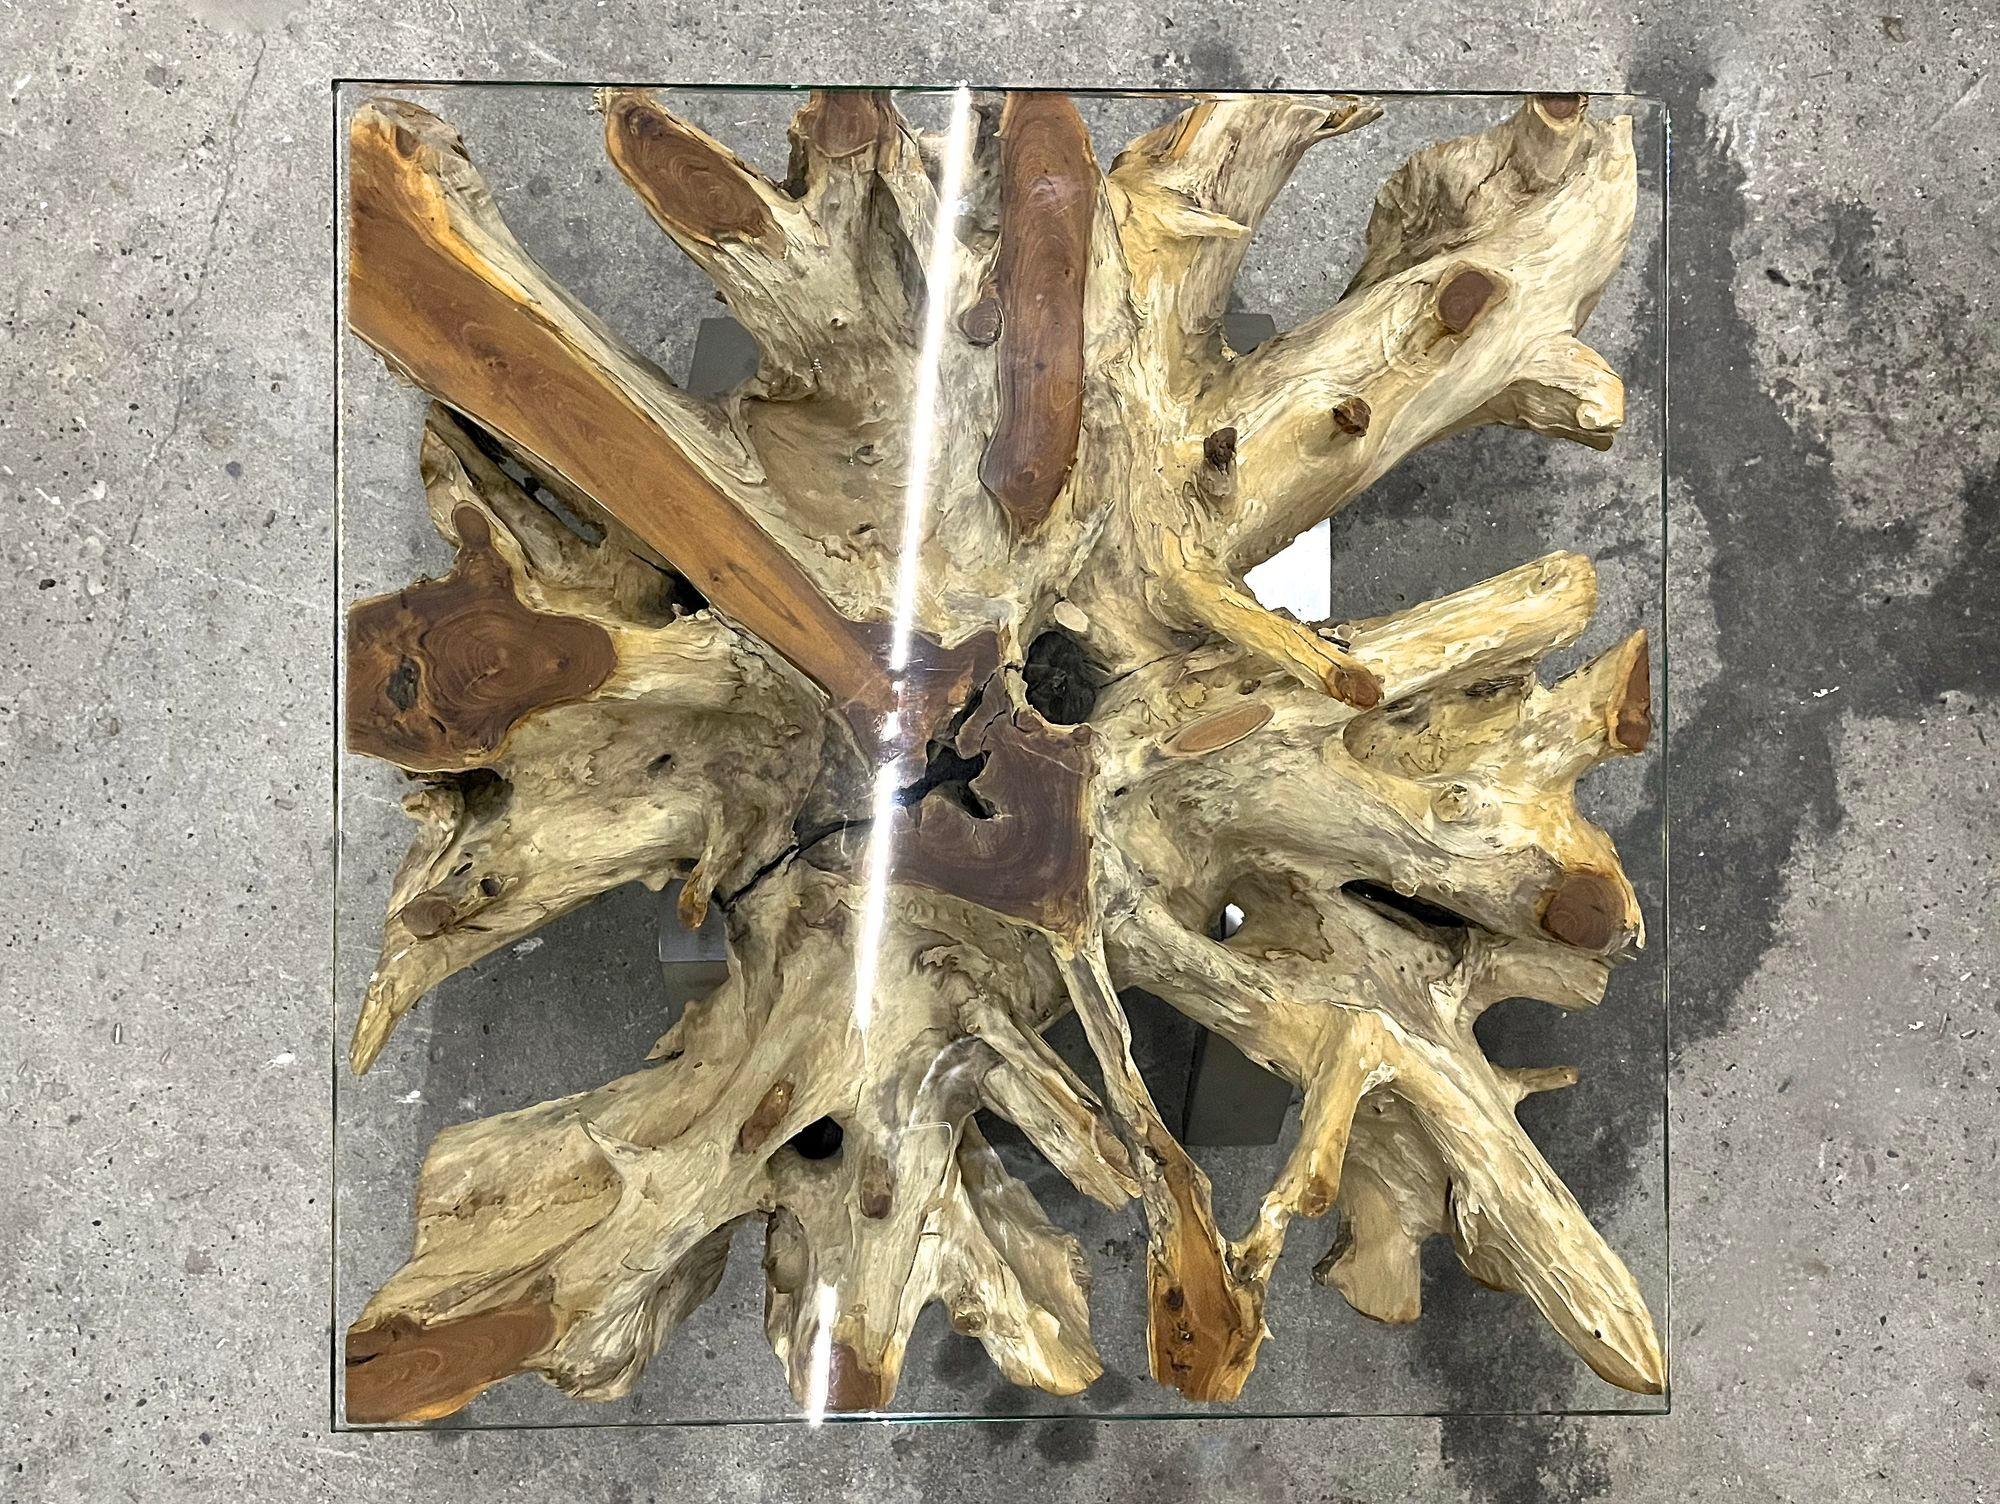 Extraordinary modern teak root coffee/ sofa table with safety glass plate on stainless steel feet. Impressing with an amazing organic design, this striking design sofa table was artfully cut out of a massive teak wood root. The cutted surfaces show